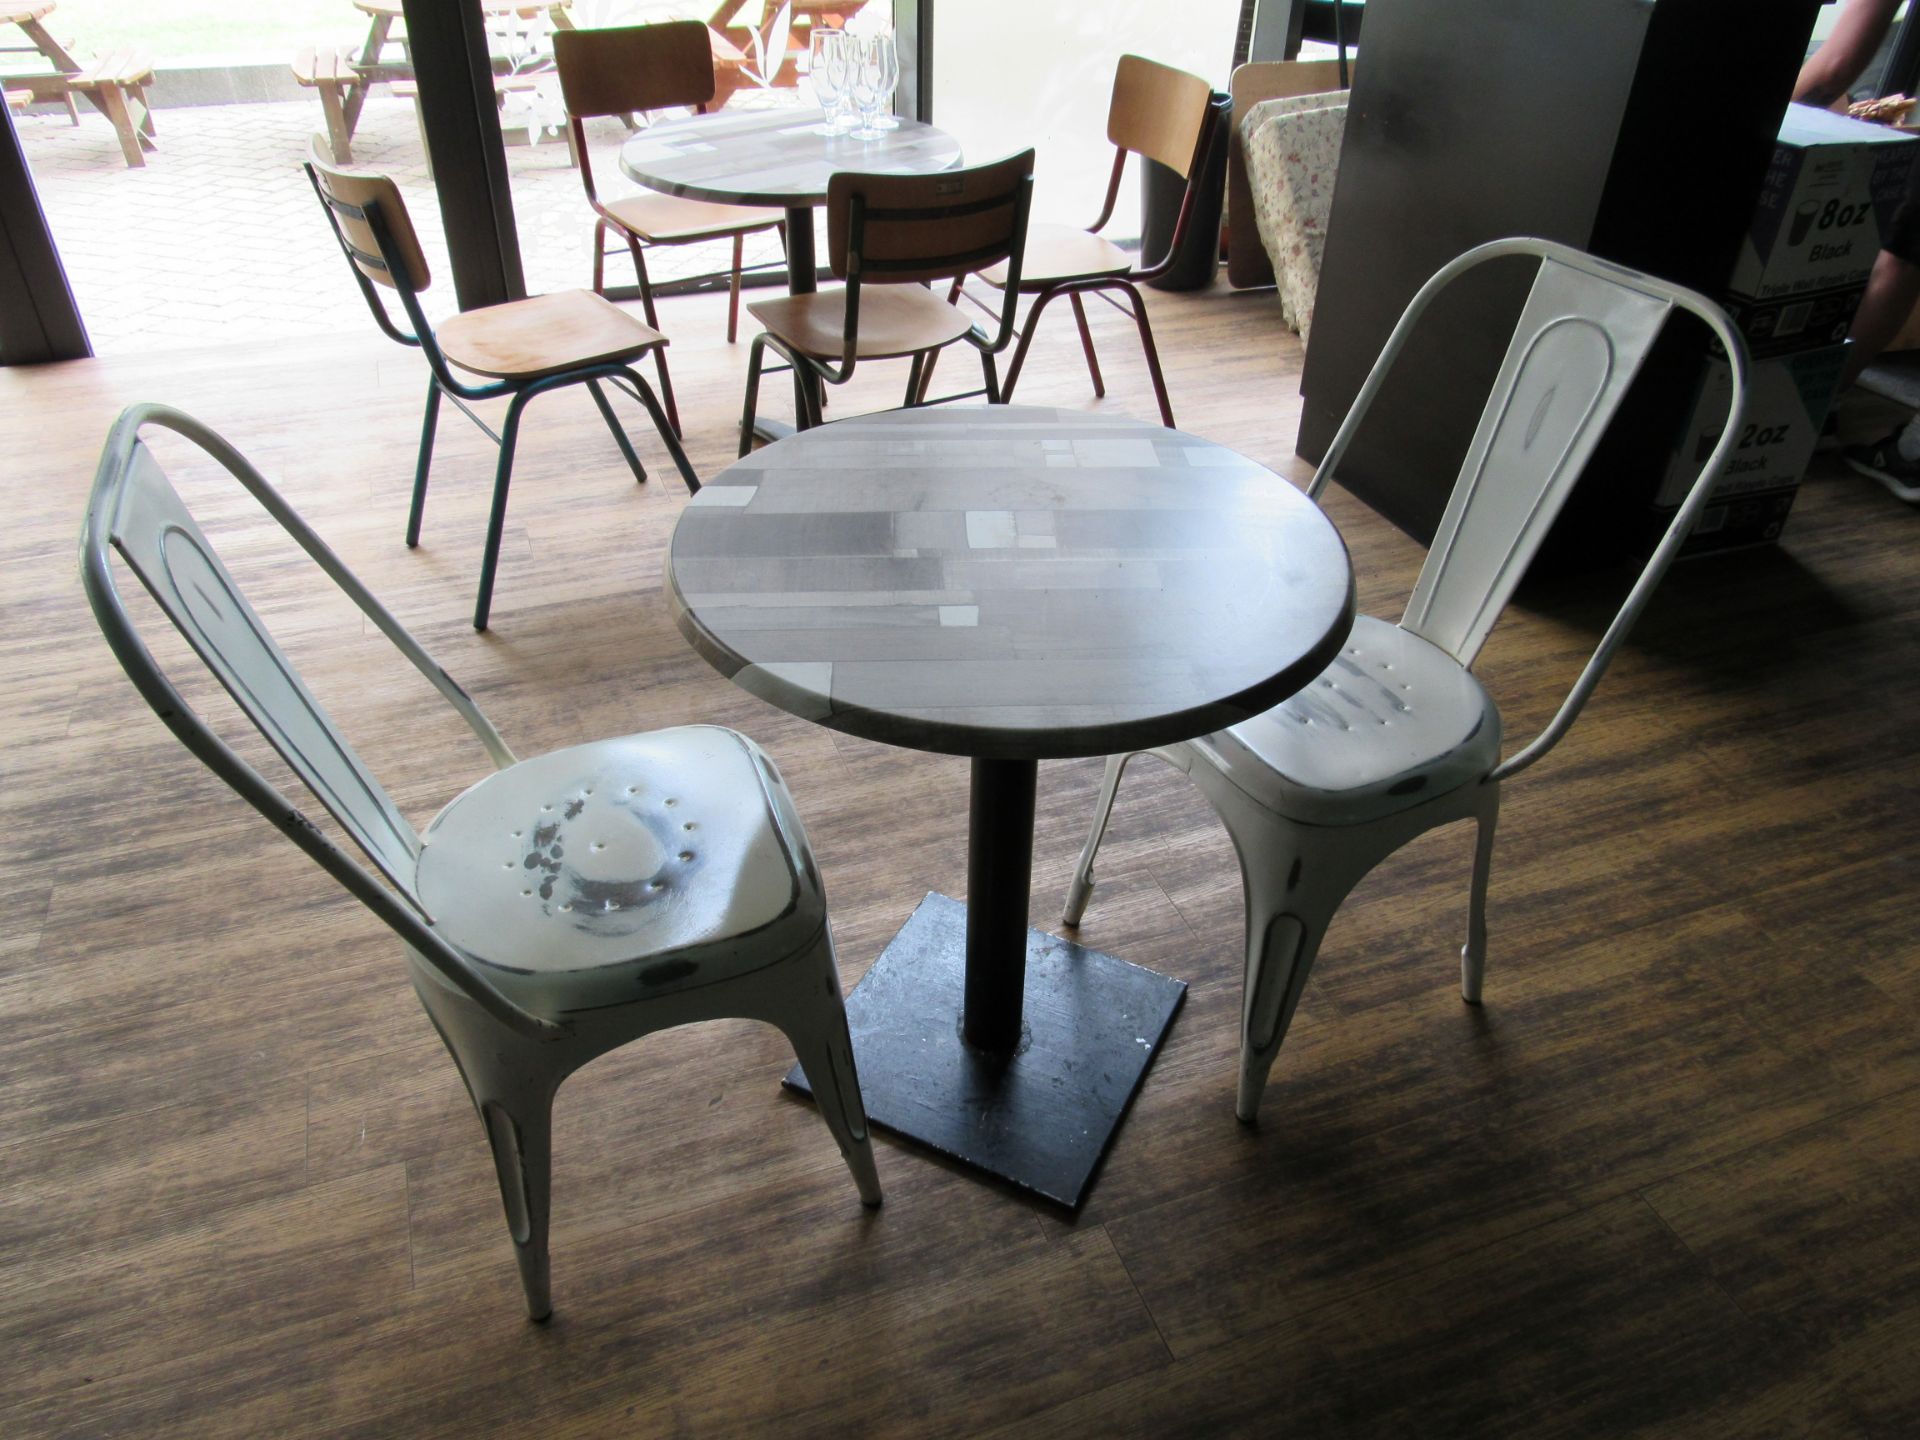 Café Table with 2 Retro Chairs - Image 2 of 2